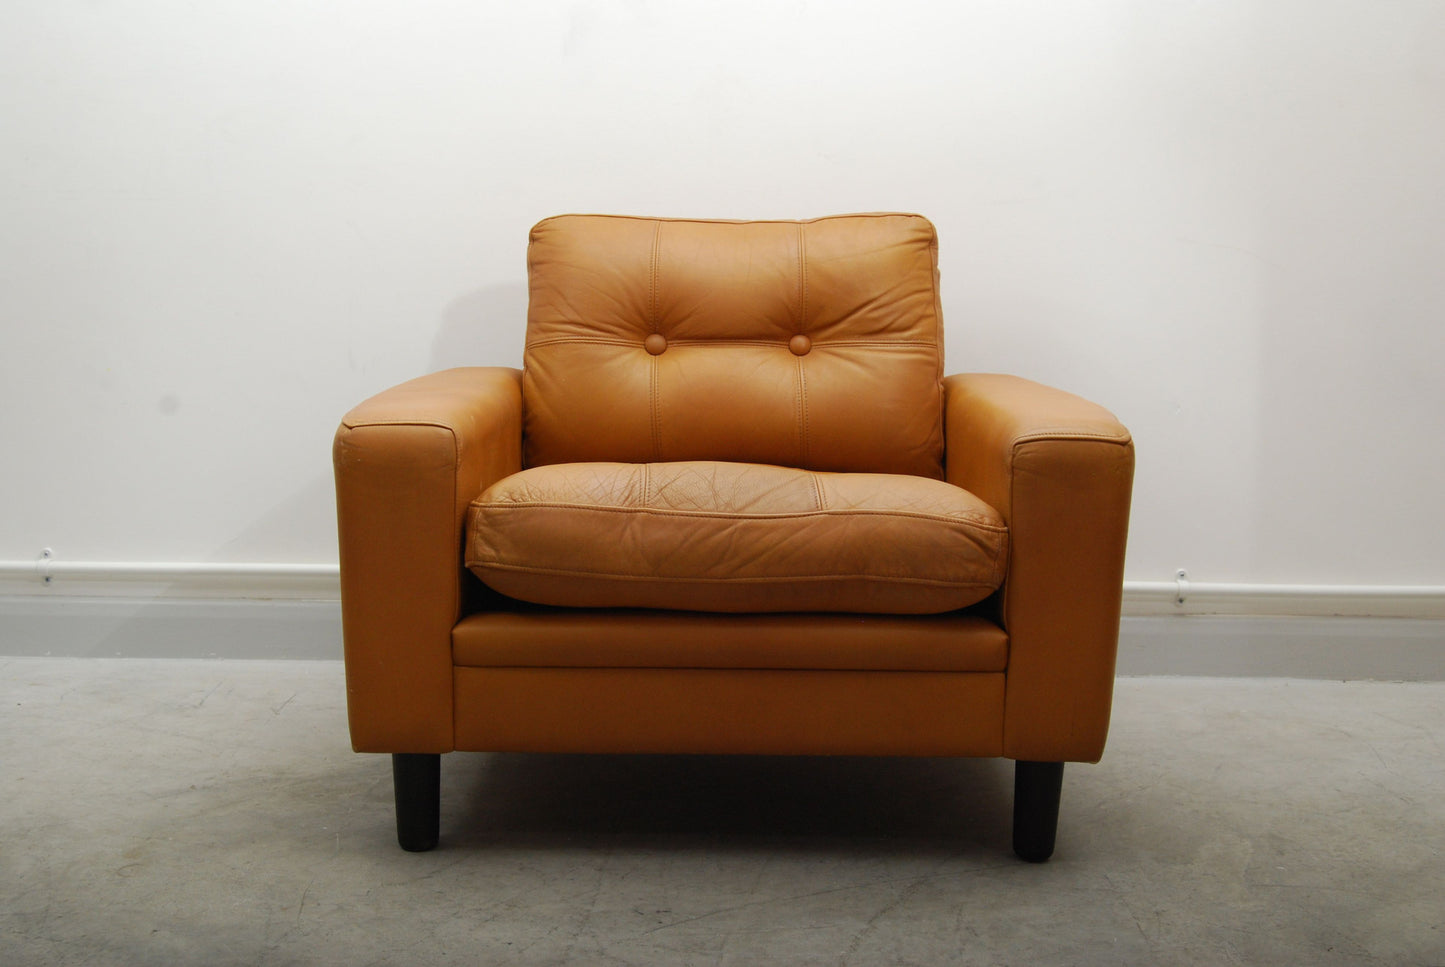 Caramel leather lowback lounge chair